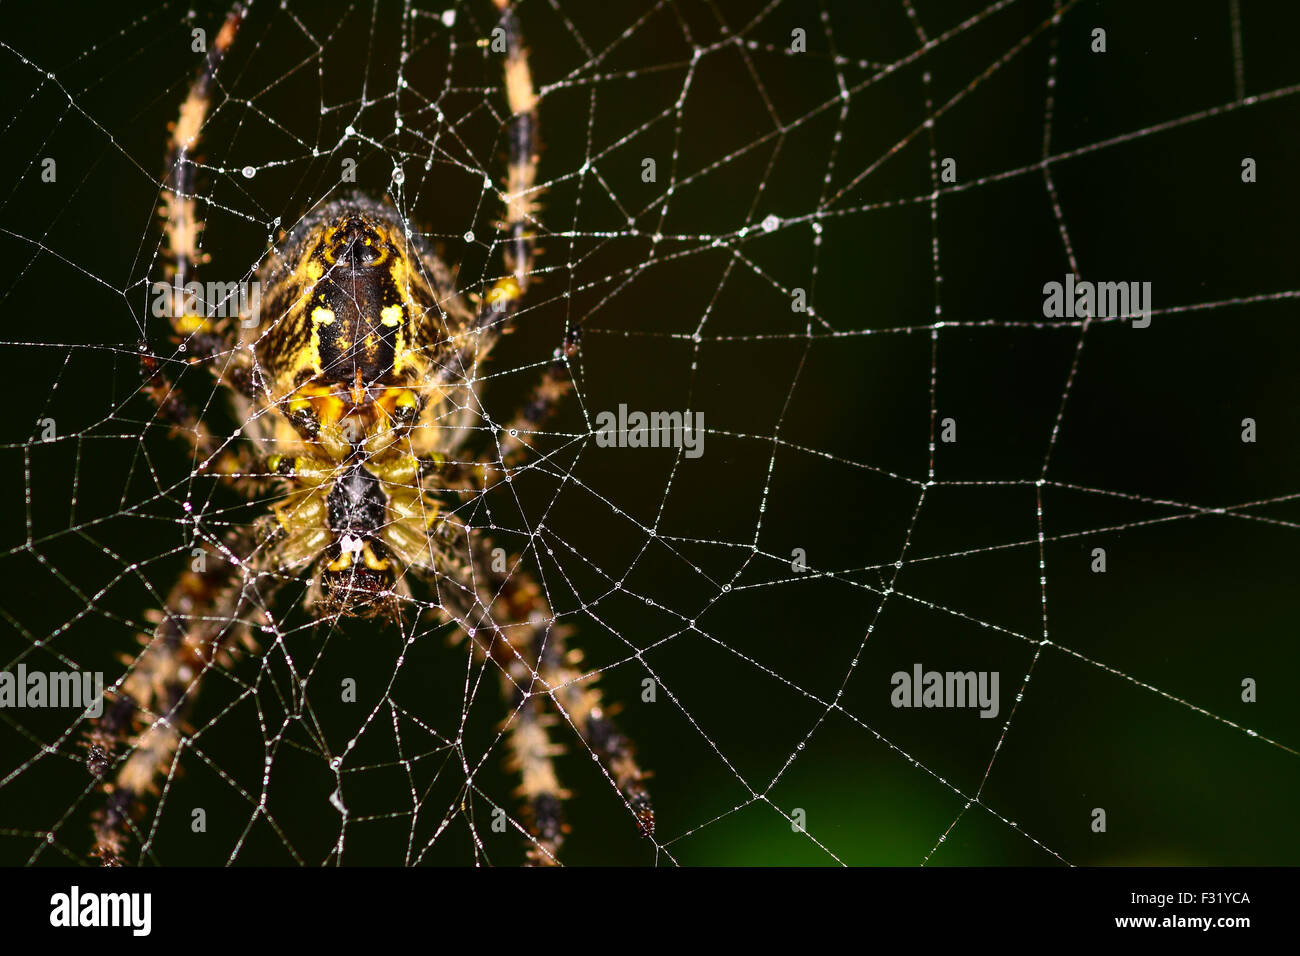 Leeds, UK. 28th Sep, 2015. A very misty start to Monday morning in Leeds led to water drops forming on spider webs creating an almost jewel like appearance, this garden spider was remaining in his web whilst other spiders had vacated theirs. Taken on the 28th September 2015 in Leeds, West Yorkshire. Credit:  Andrew Gardner/Alamy Live News Stock Photo